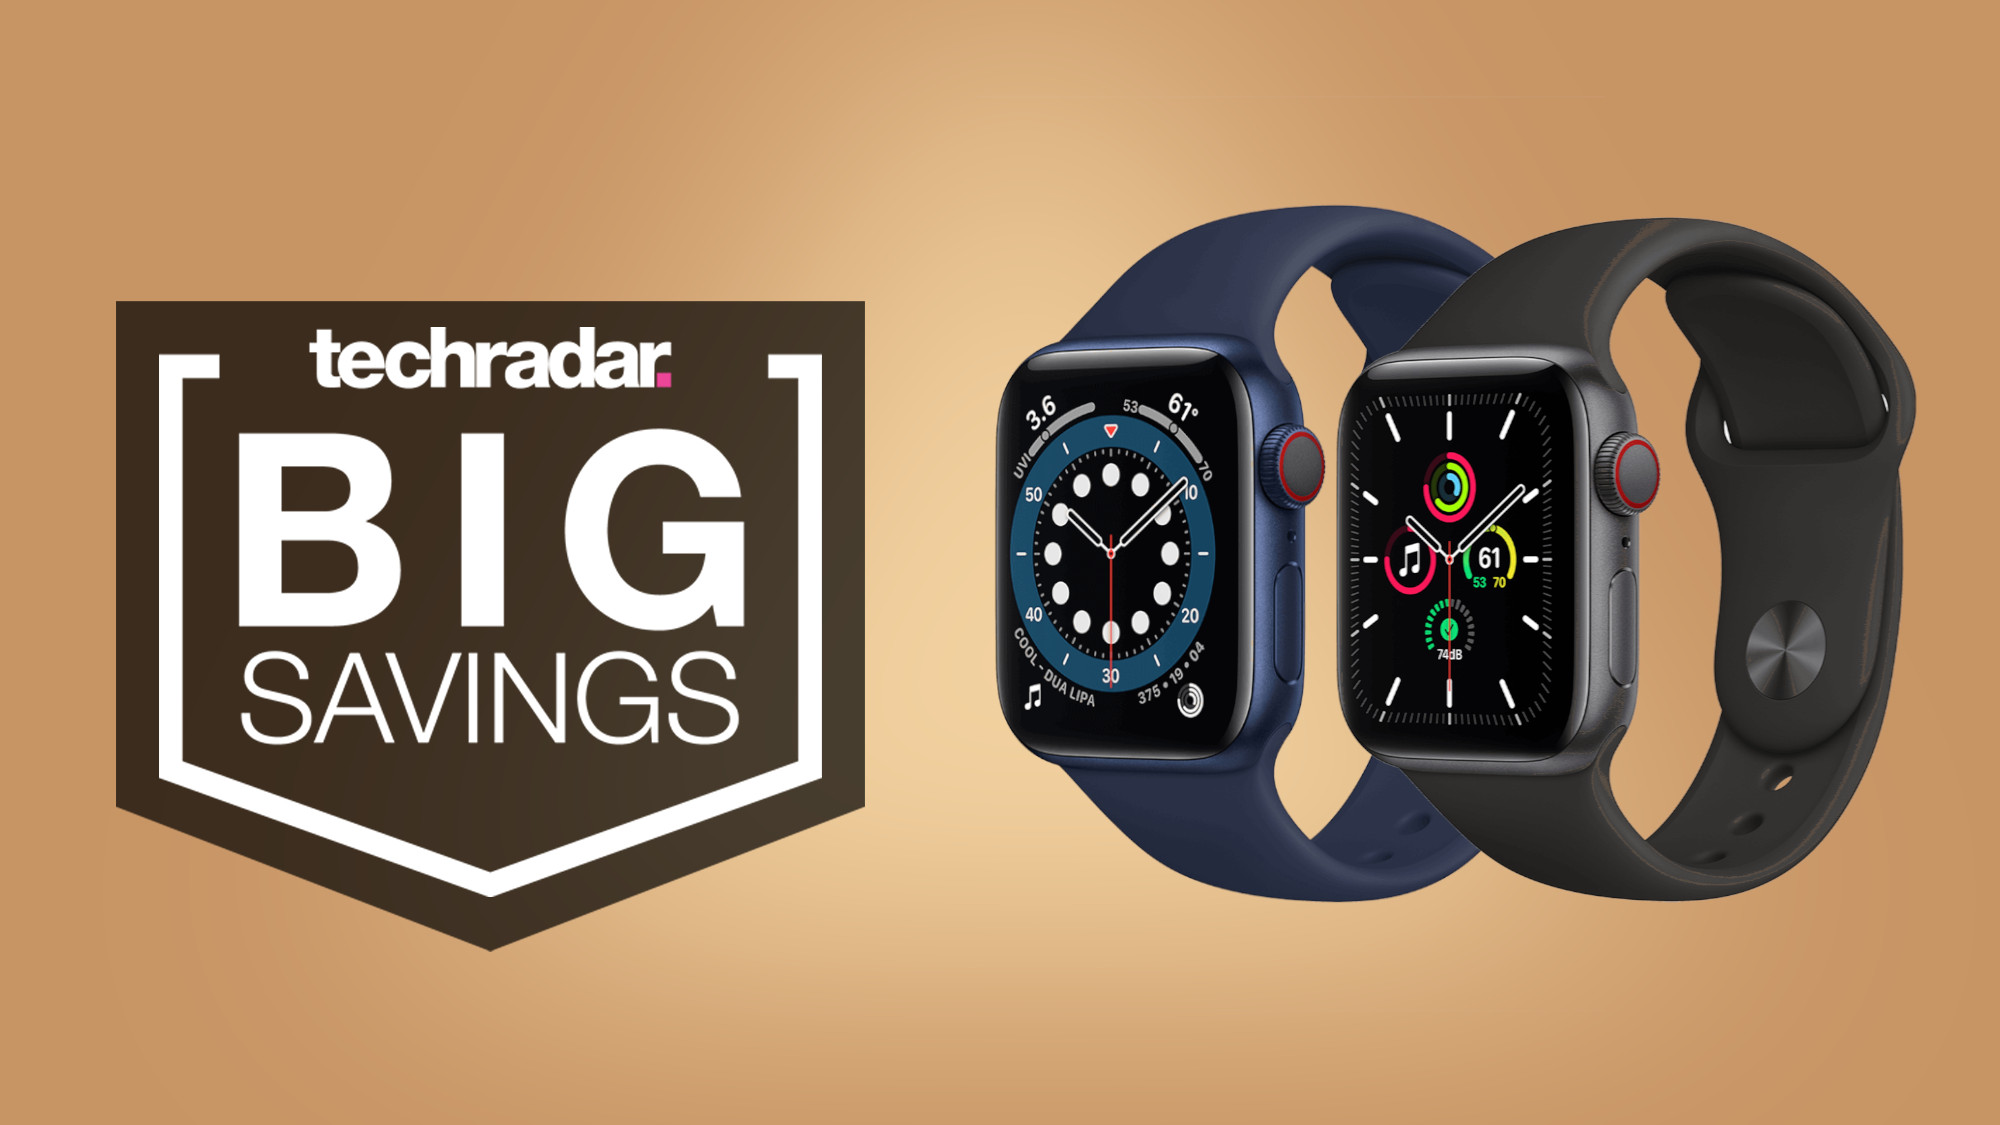 AT&T's latest Apple Watch deals can bag you a free Apple Watch SE